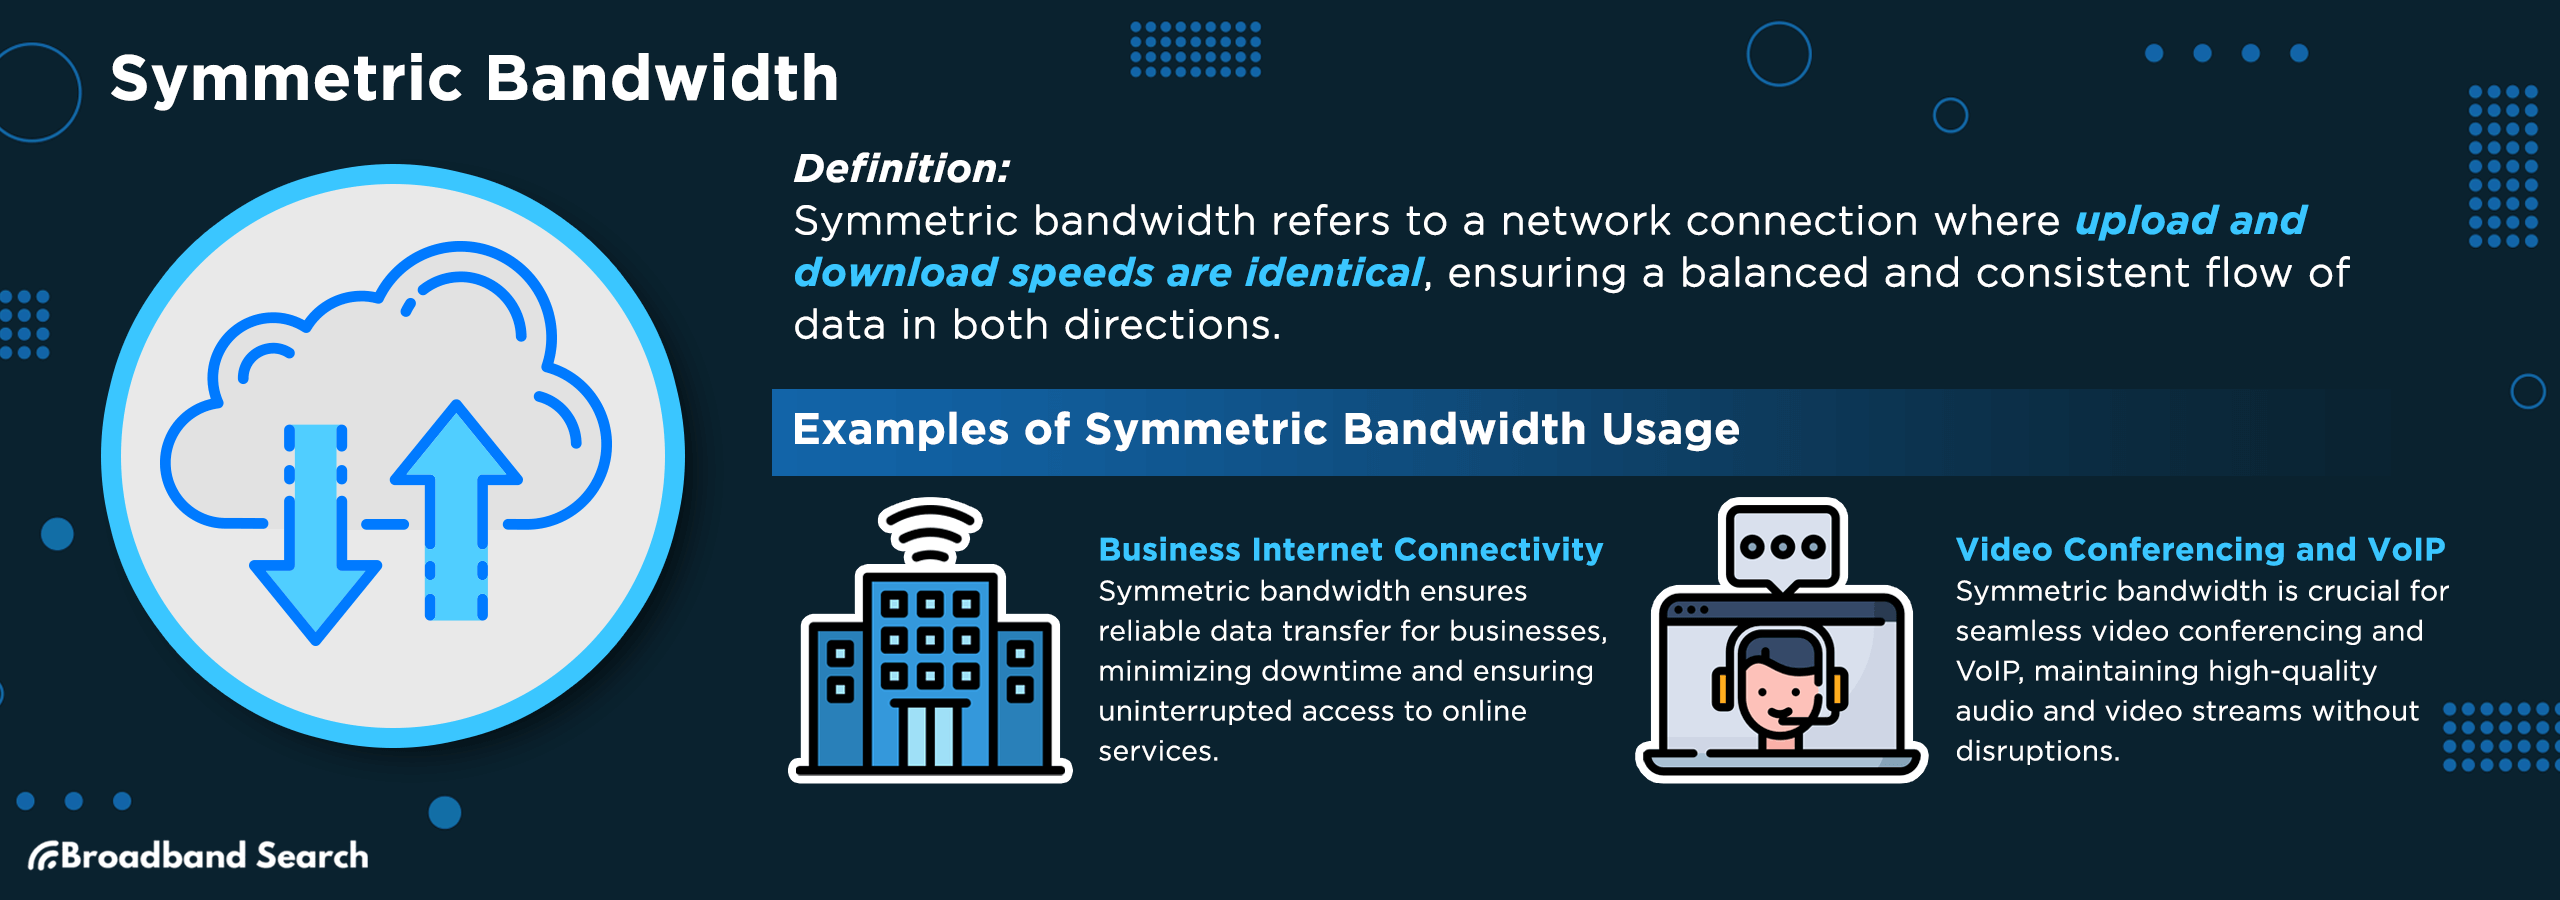 definition and examples of symmetric bandwidth